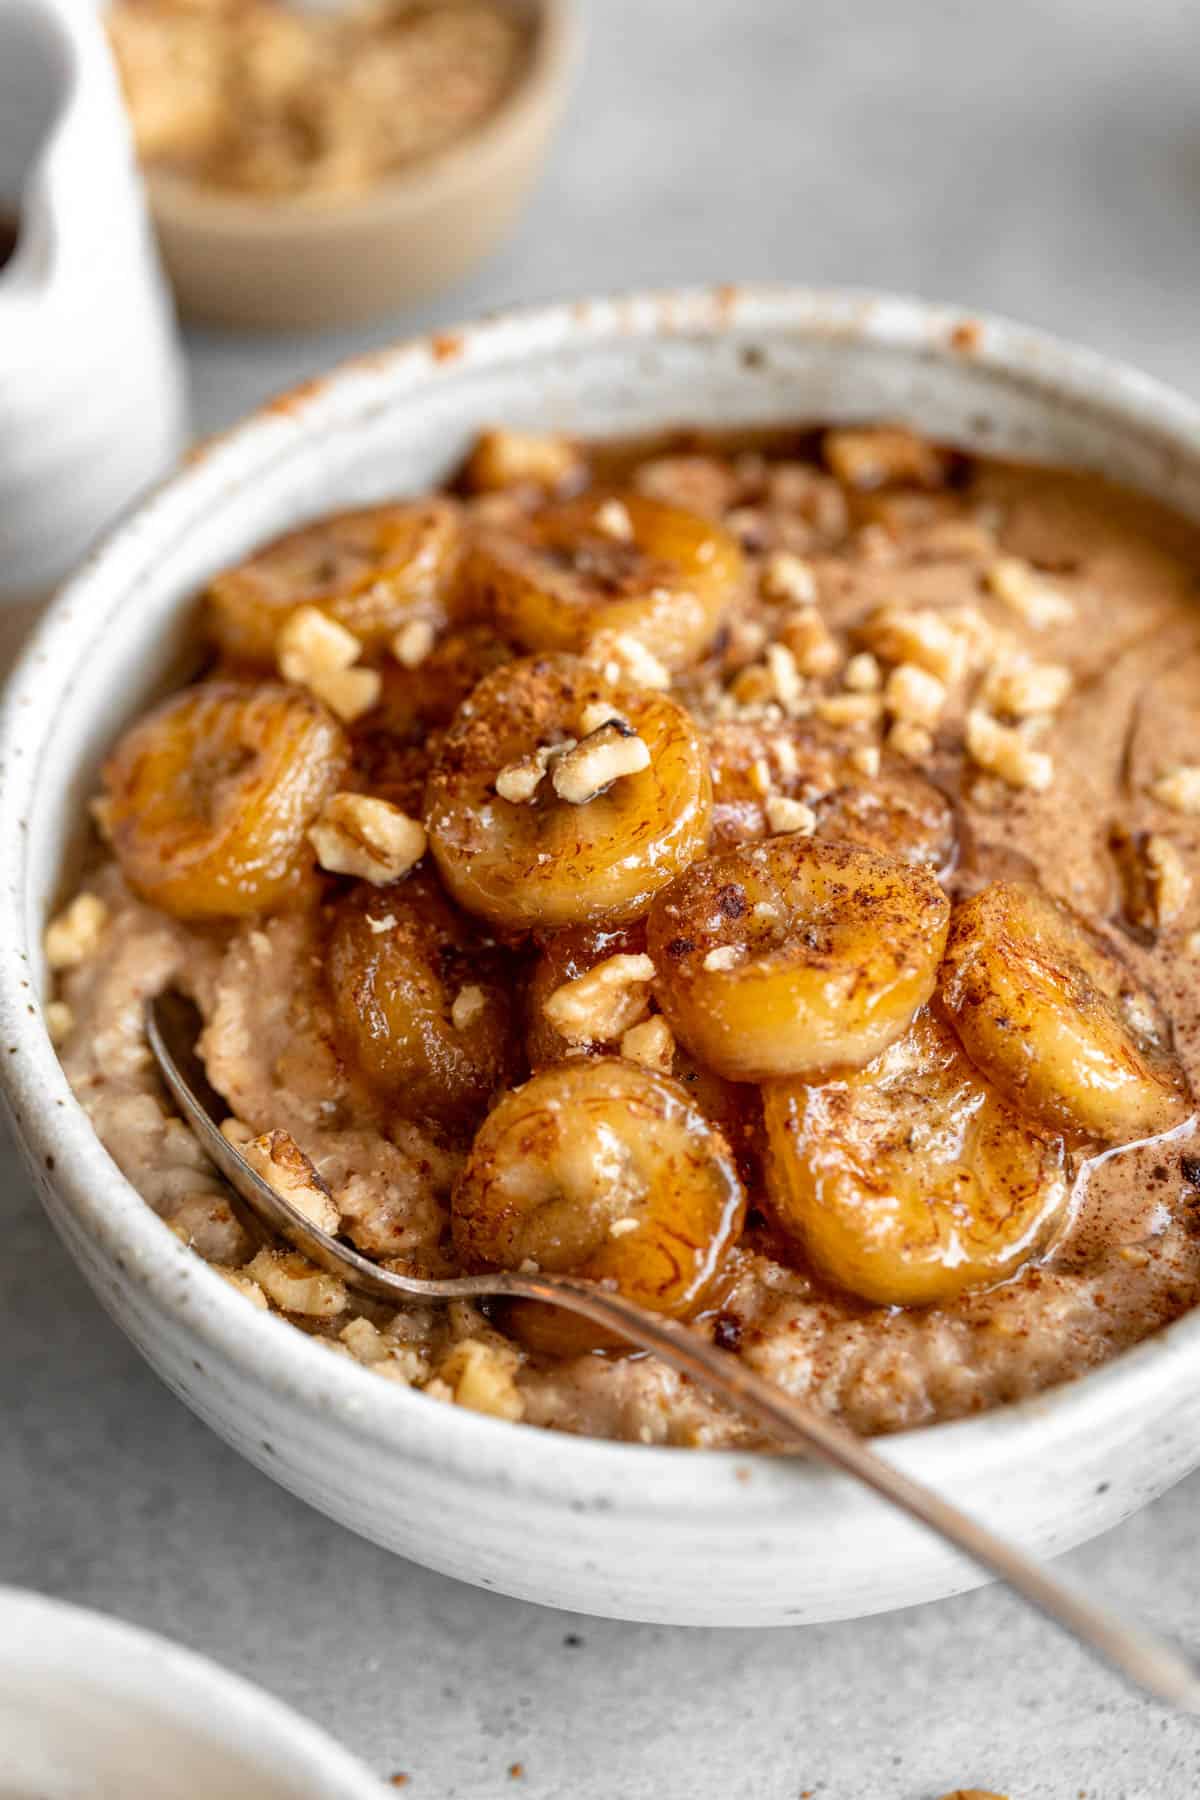 Caramelized Apple Oatmeal Recipe: Delicious, Nutritious, and Easy